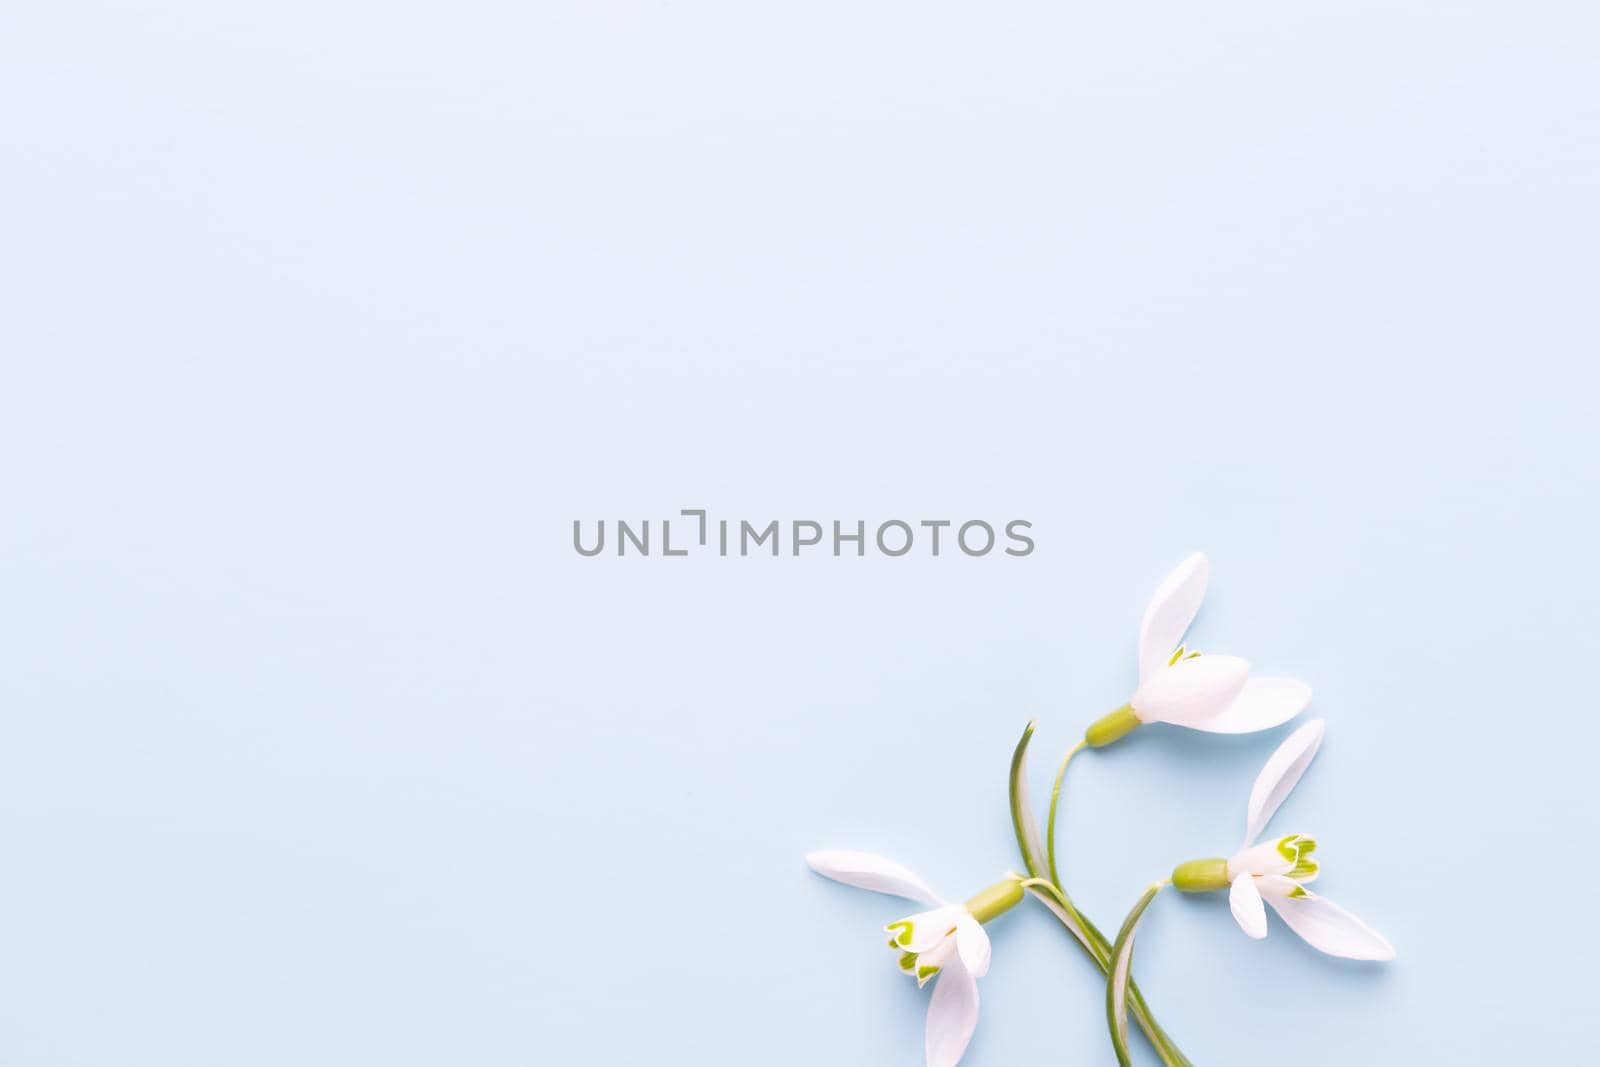 Fresh snowdrops on blue background with place for text. Spring greeting card. Flat lay.